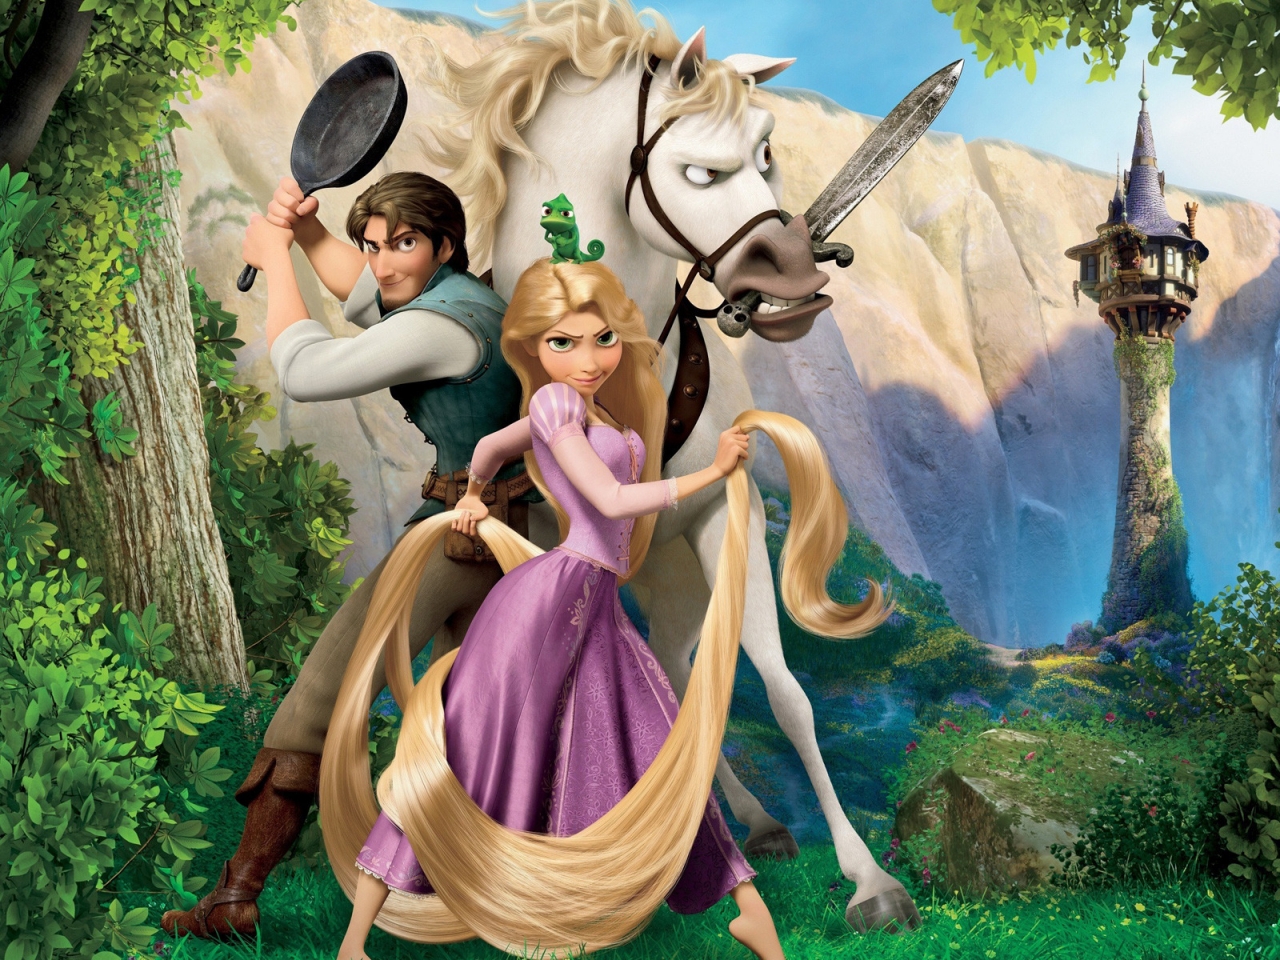 Tangled Animated Musical Film for 1280 x 960 resolution